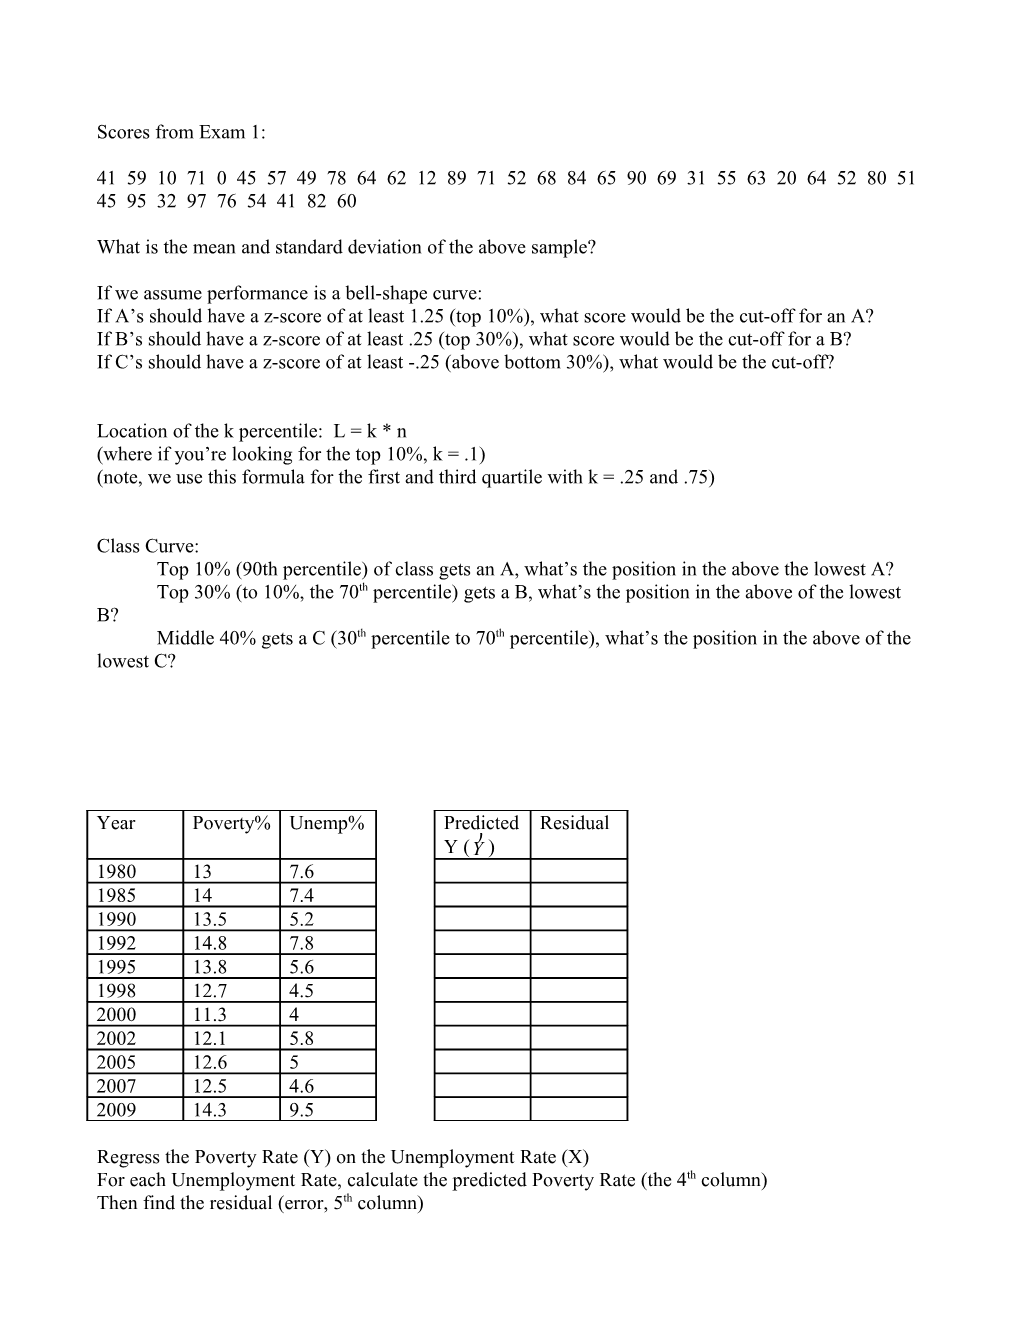 What Is the Mean and Standard Deviation of the Above Sample?